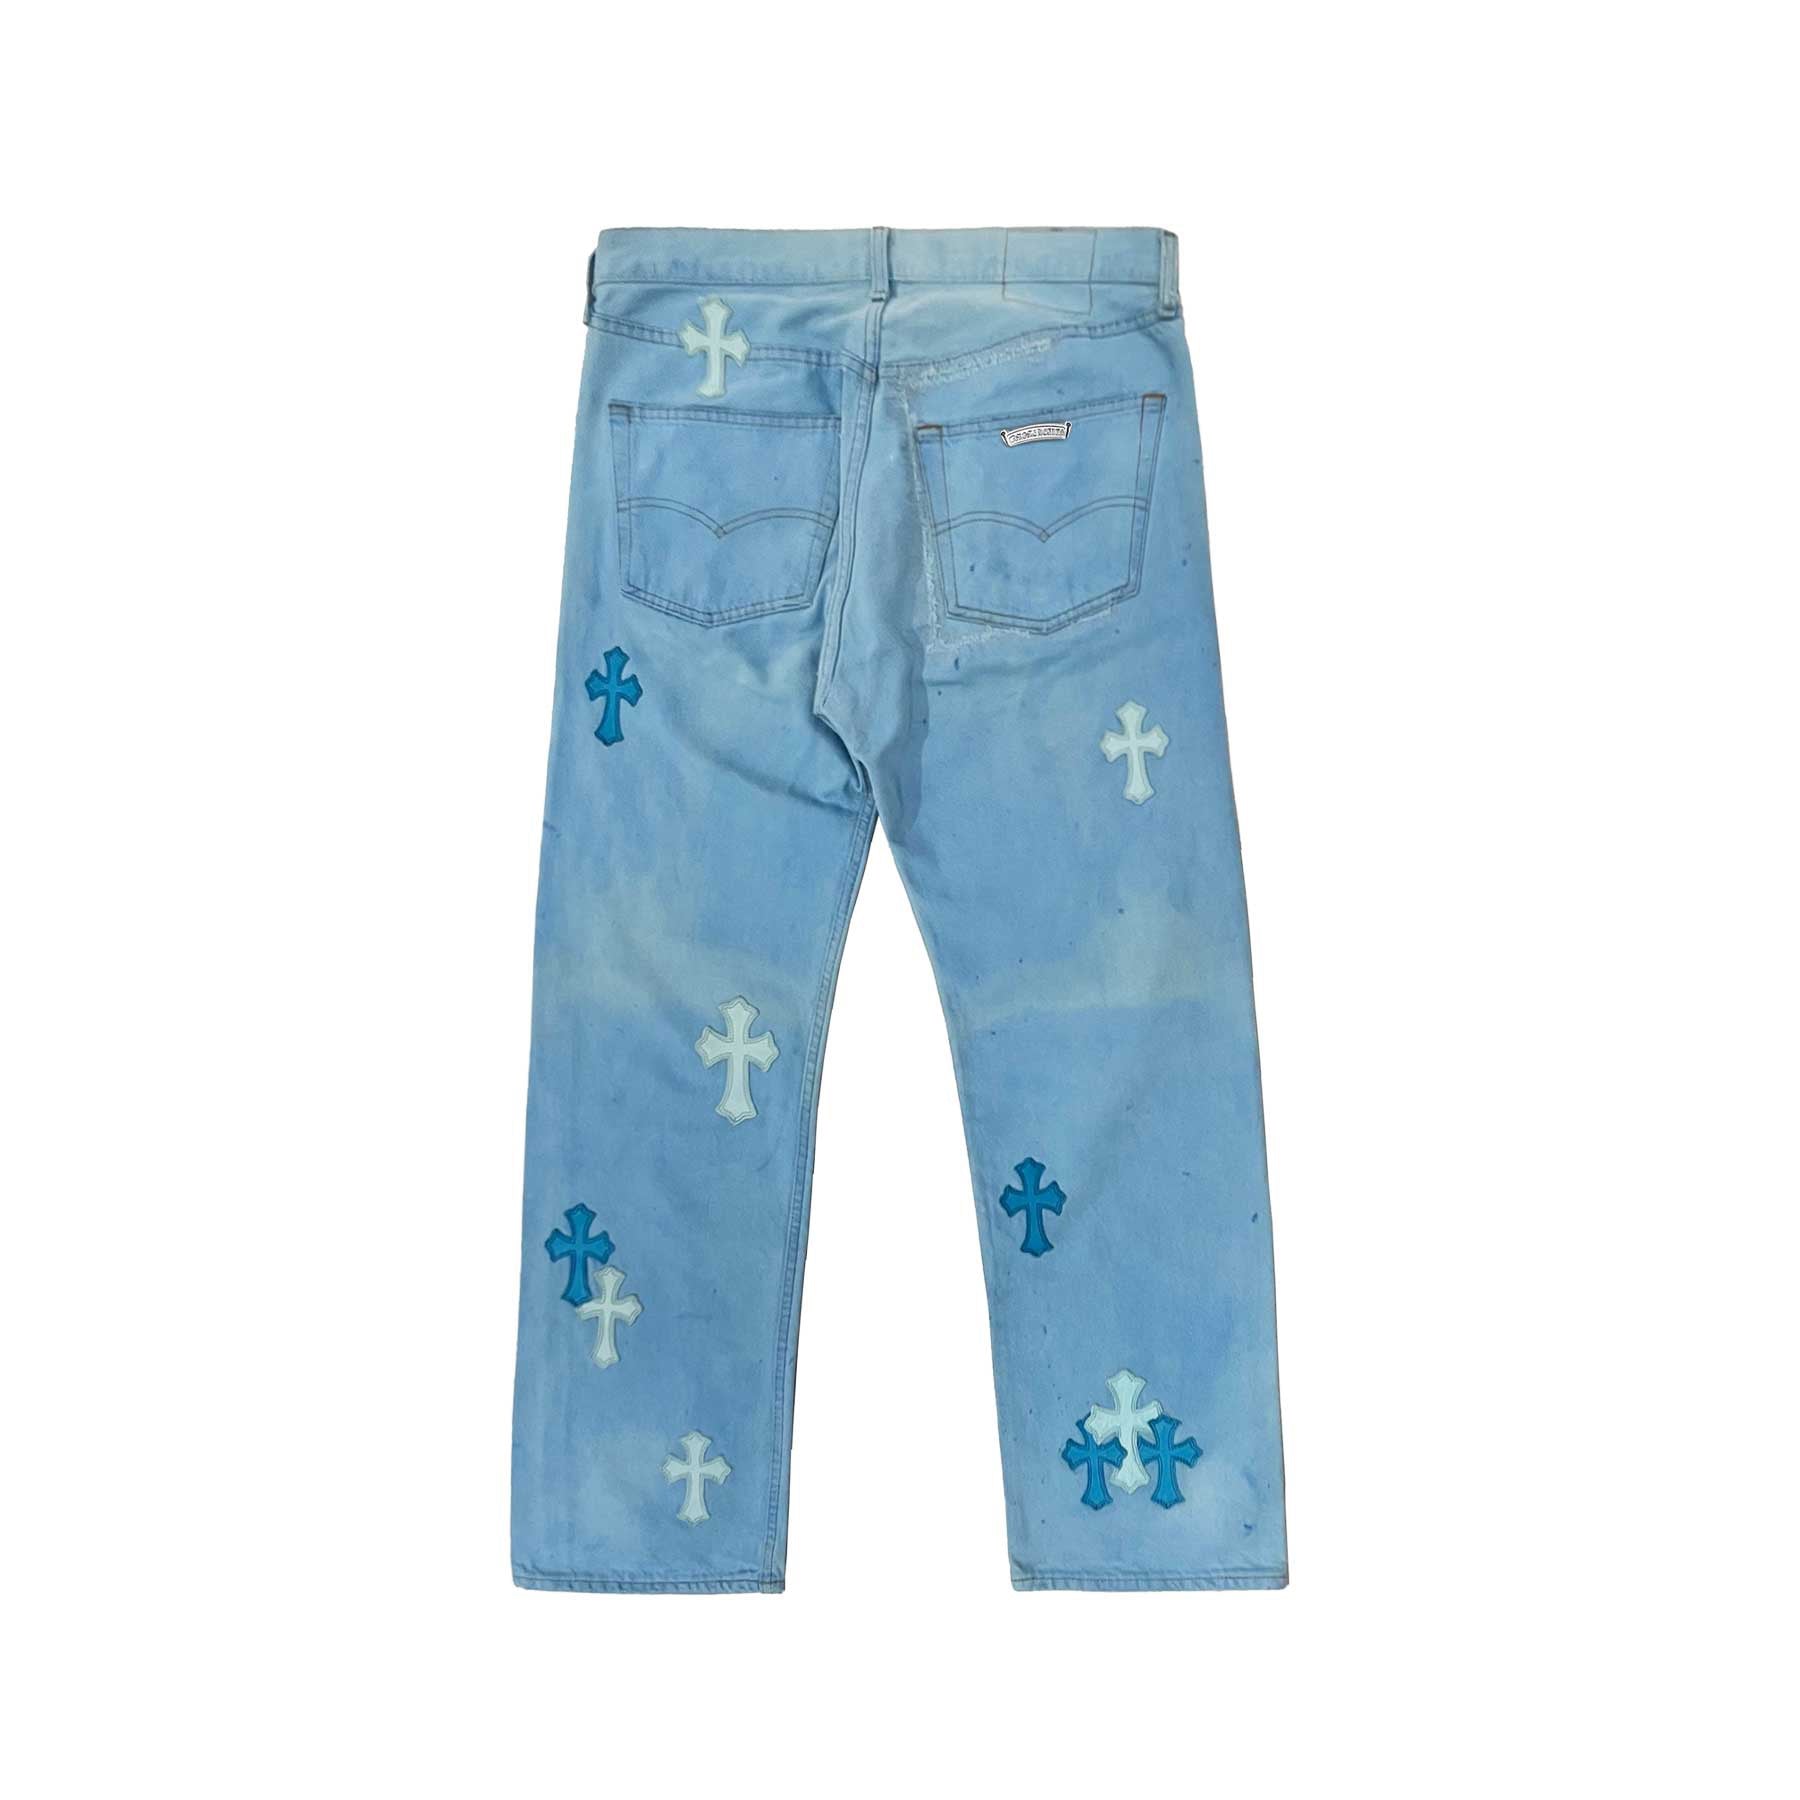 Chrome Hearts Archive Drake Blue Leather Cross Patch Jeans - SHENGLI ROAD MARKET